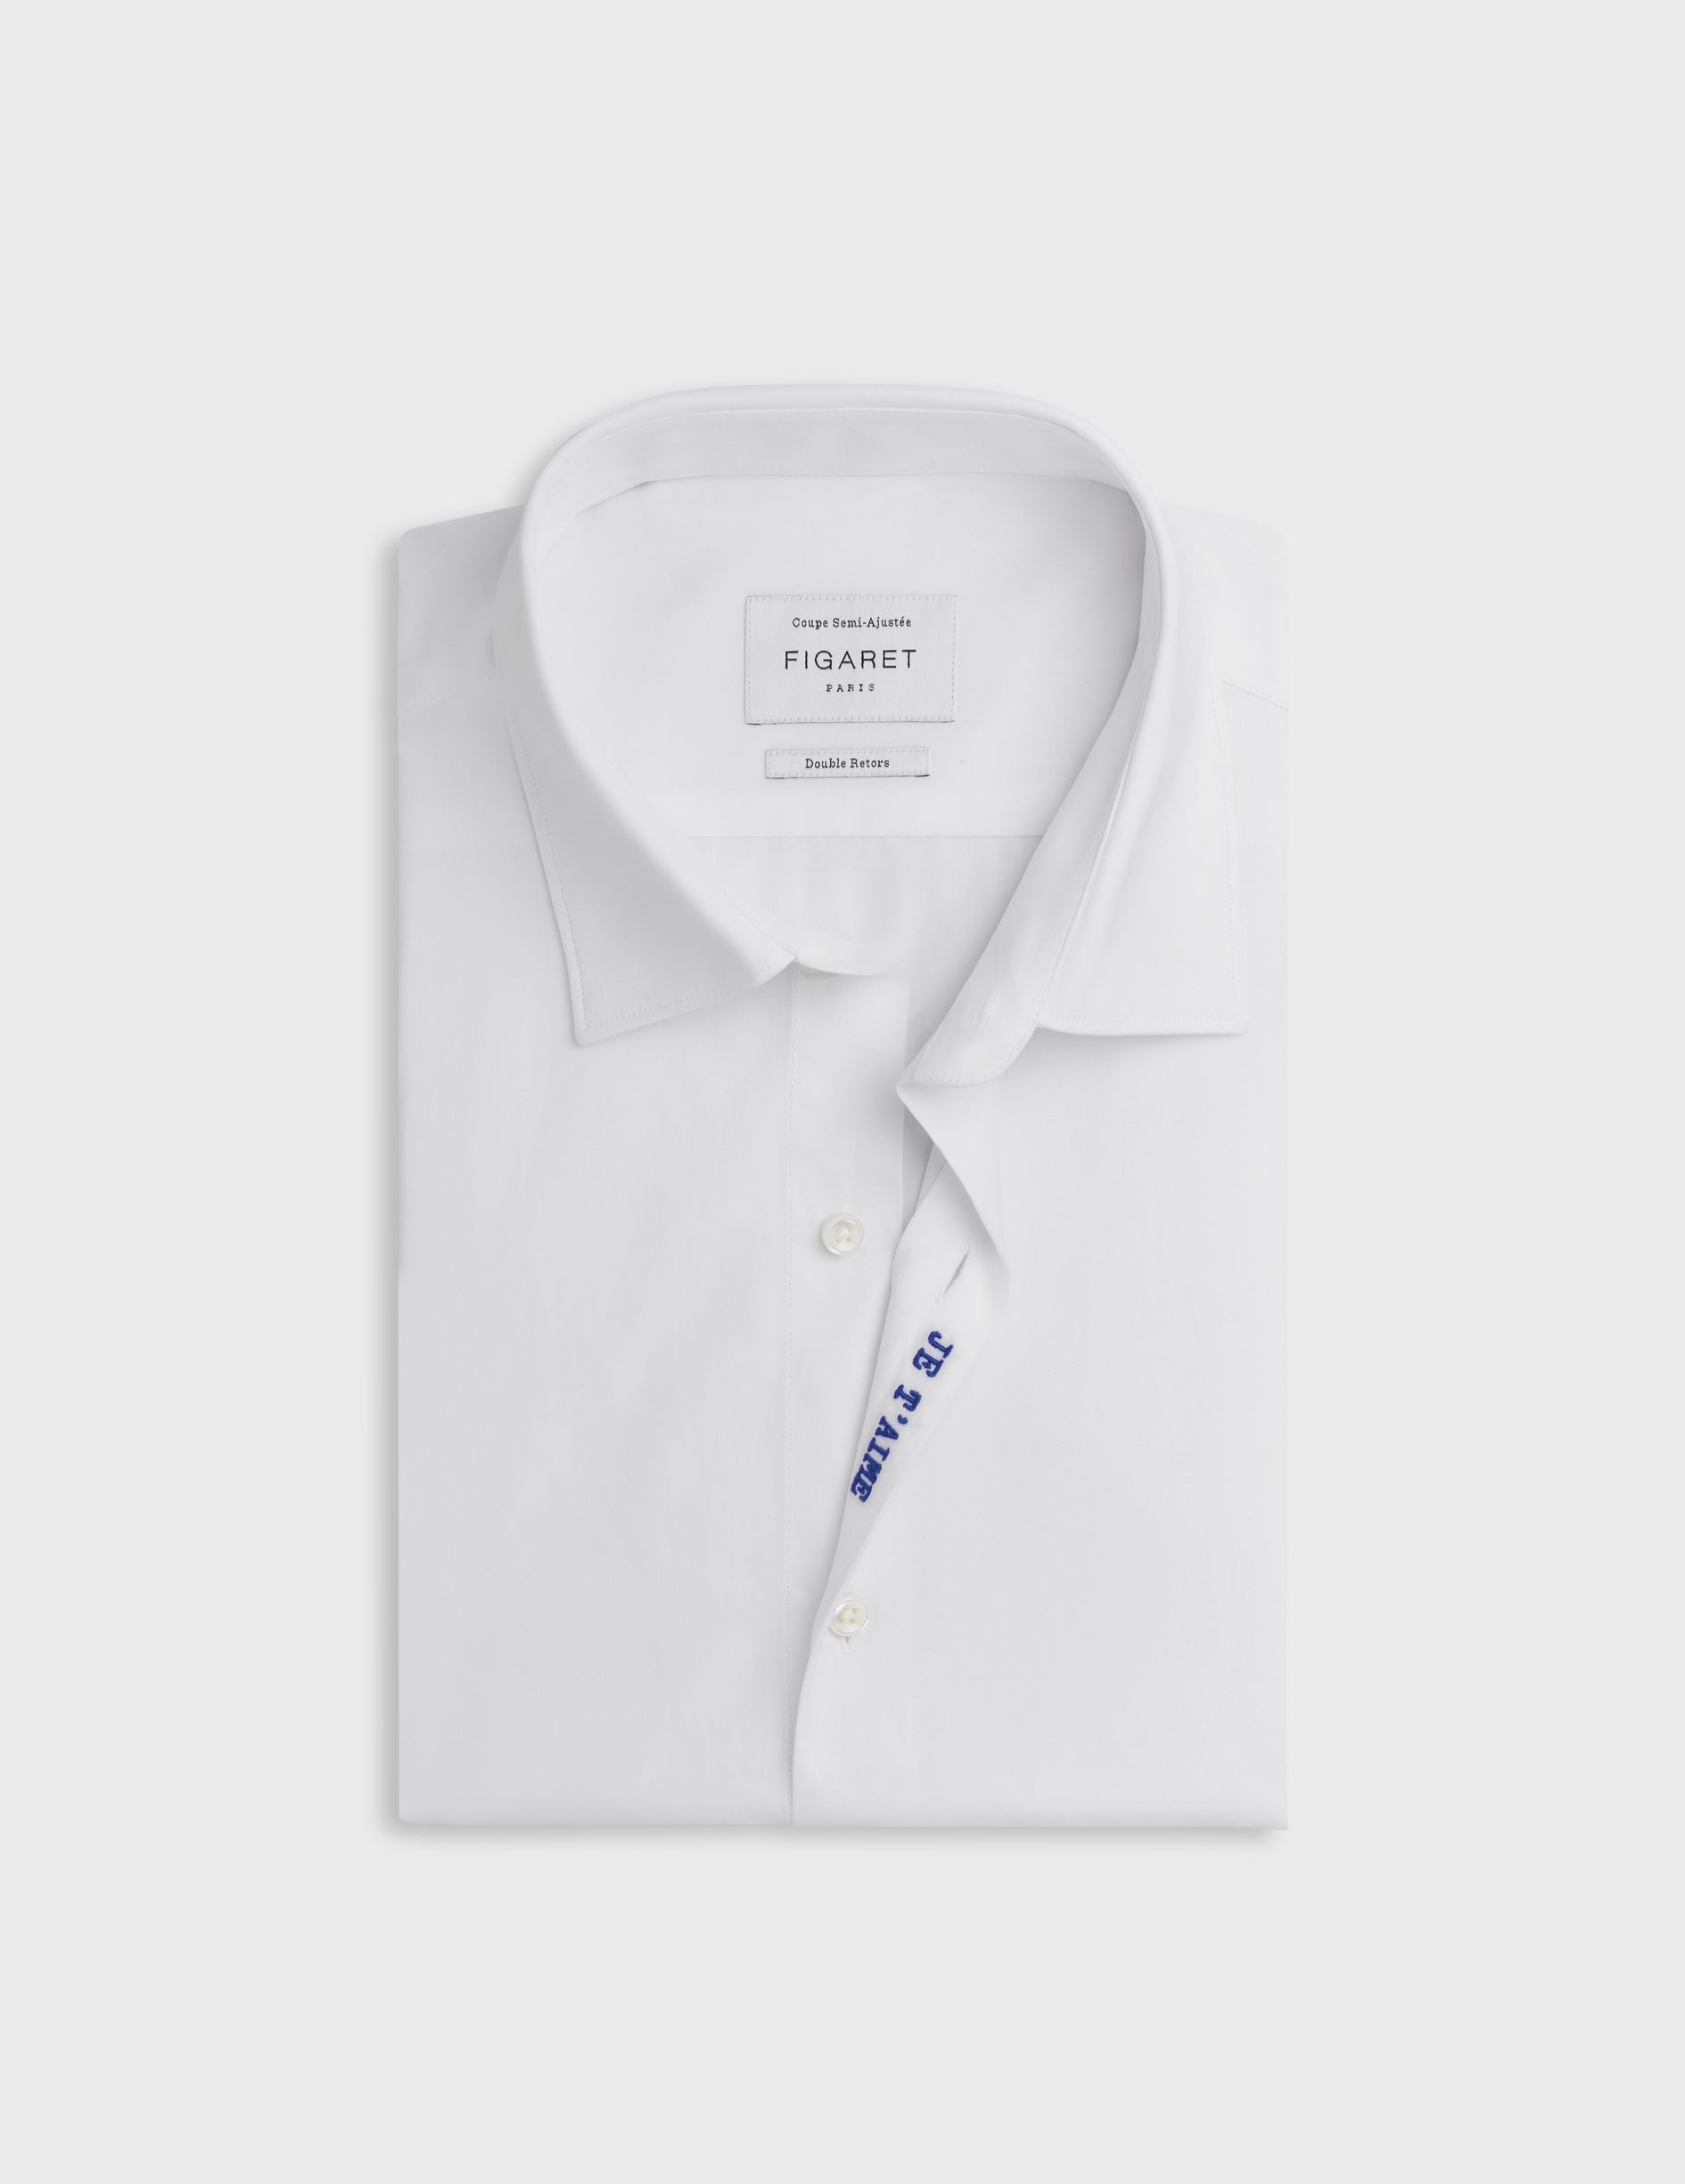 White "Je t'aime" shirt with blue embroidery - Poplin - Figaret Collar